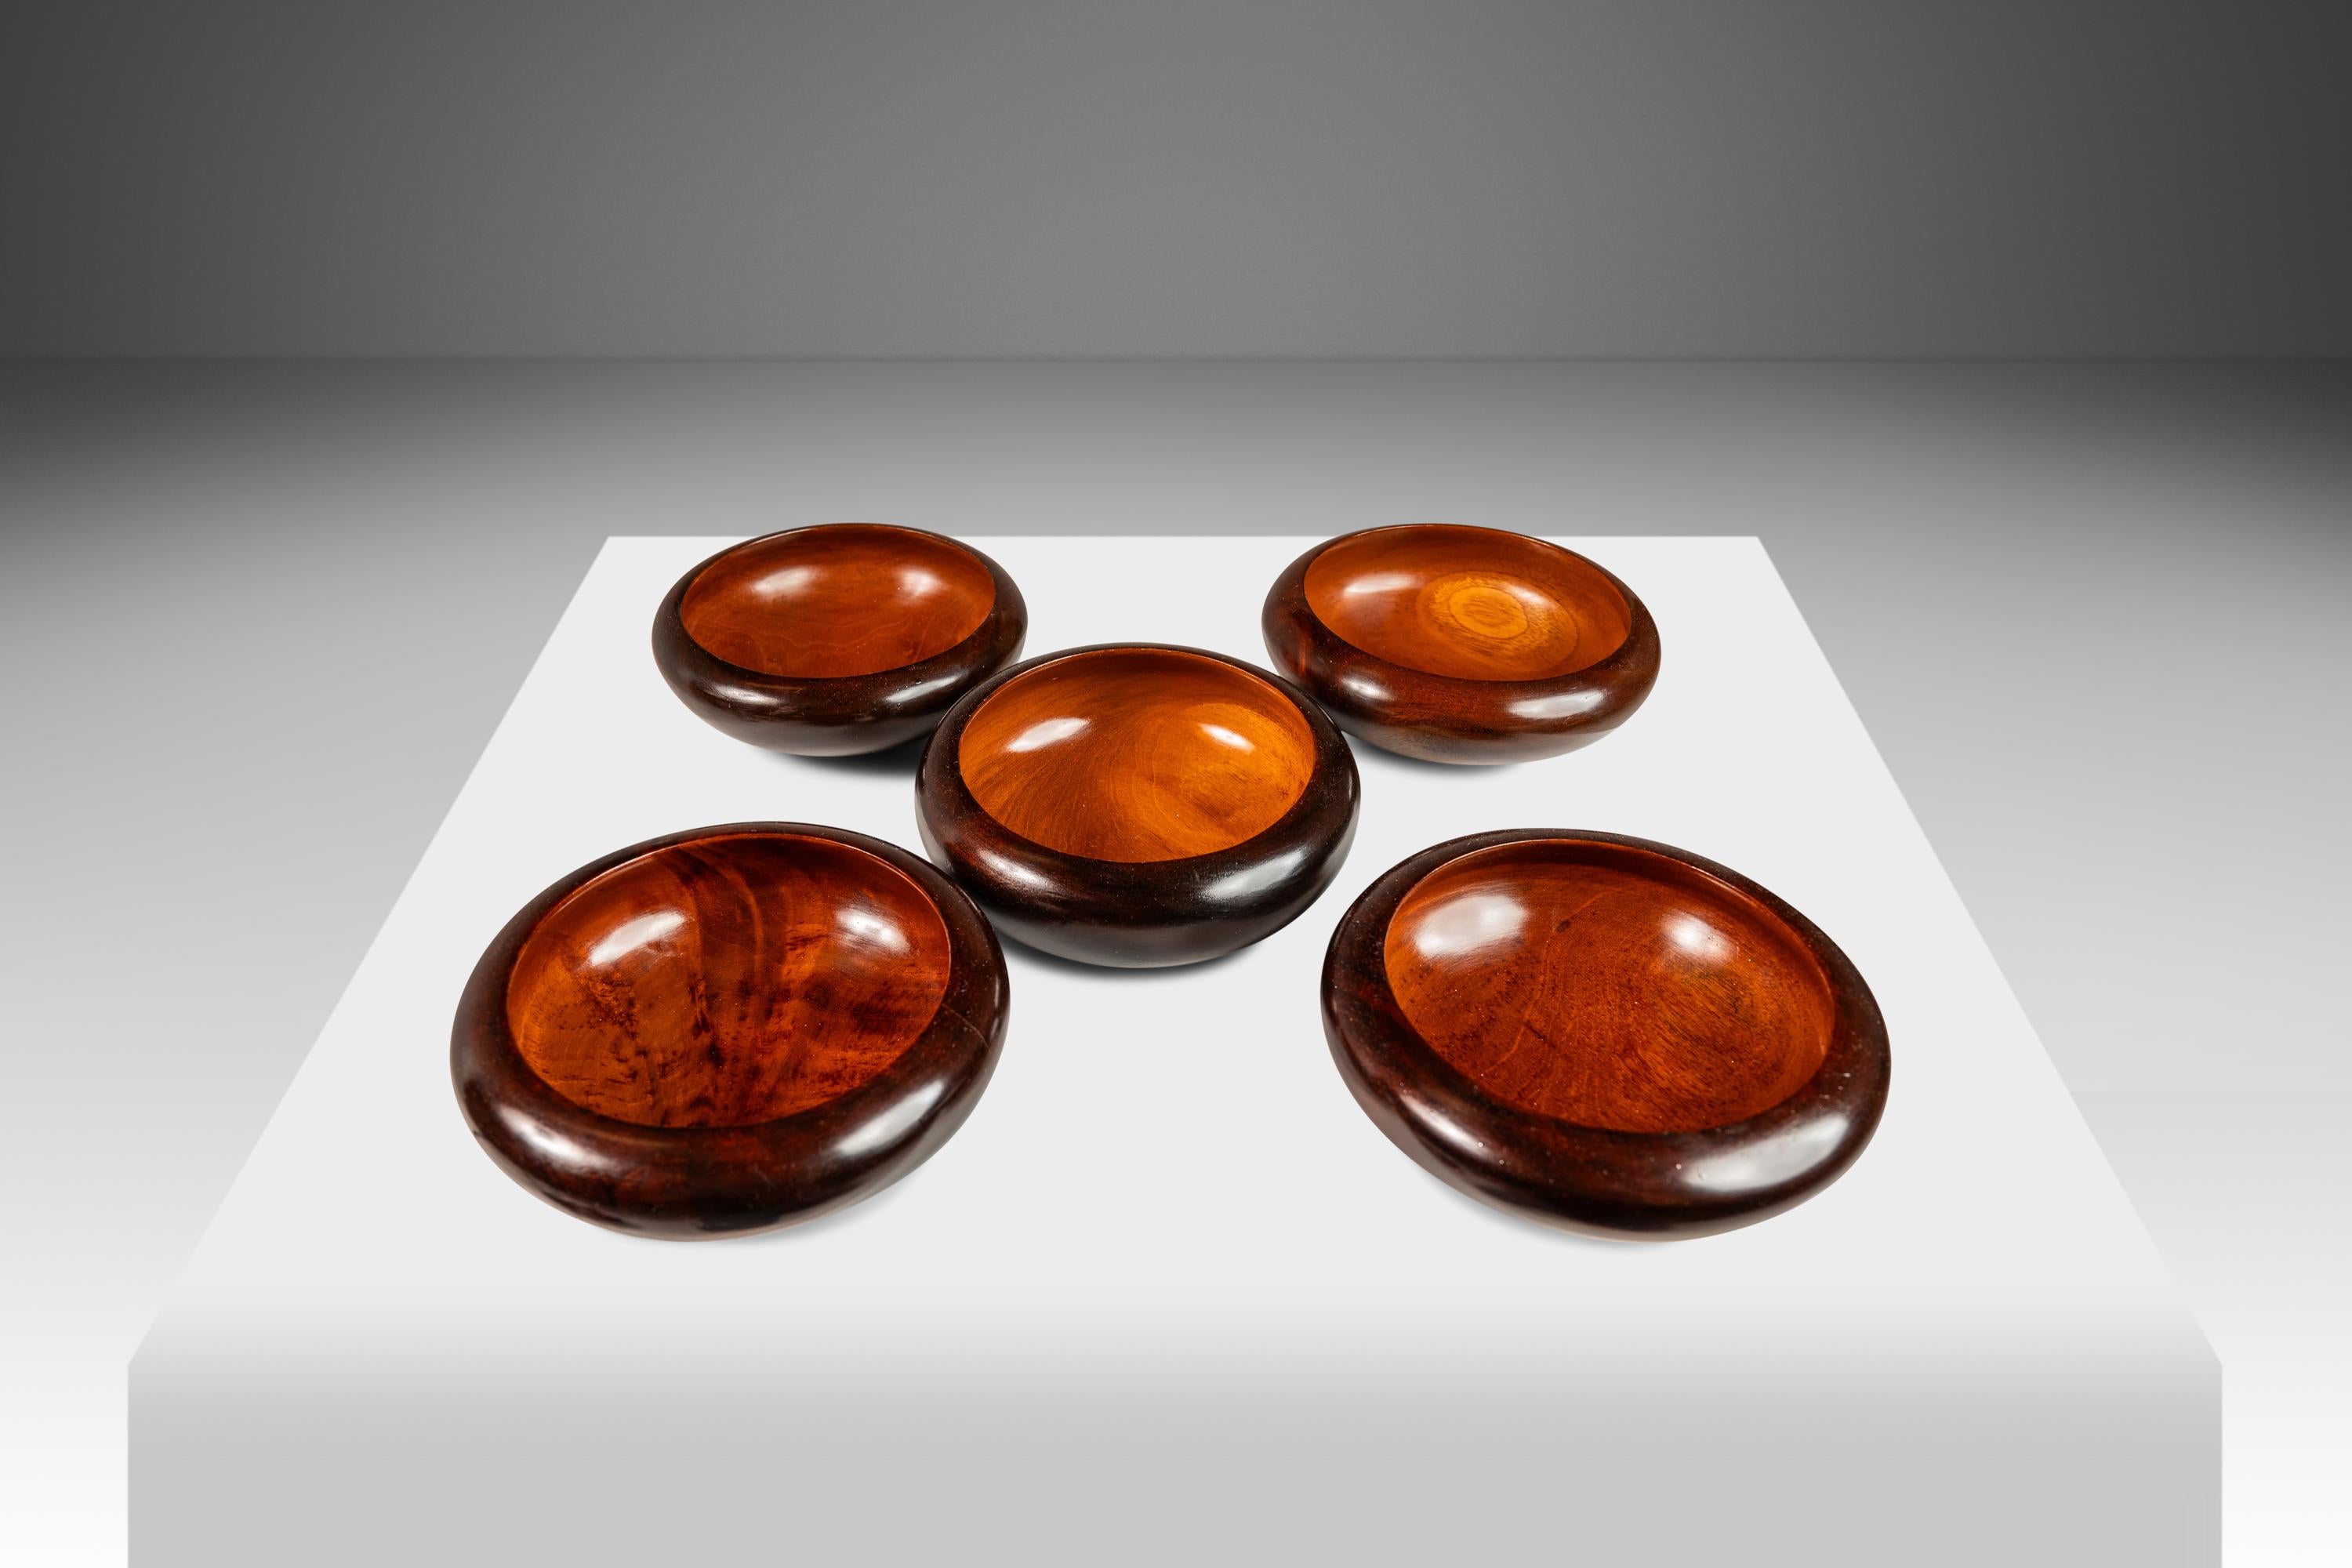 Set of 10 Organic Modern Hand-Turned Cherry Wood Serving Bowls, USA, c. 1960s For Sale 5